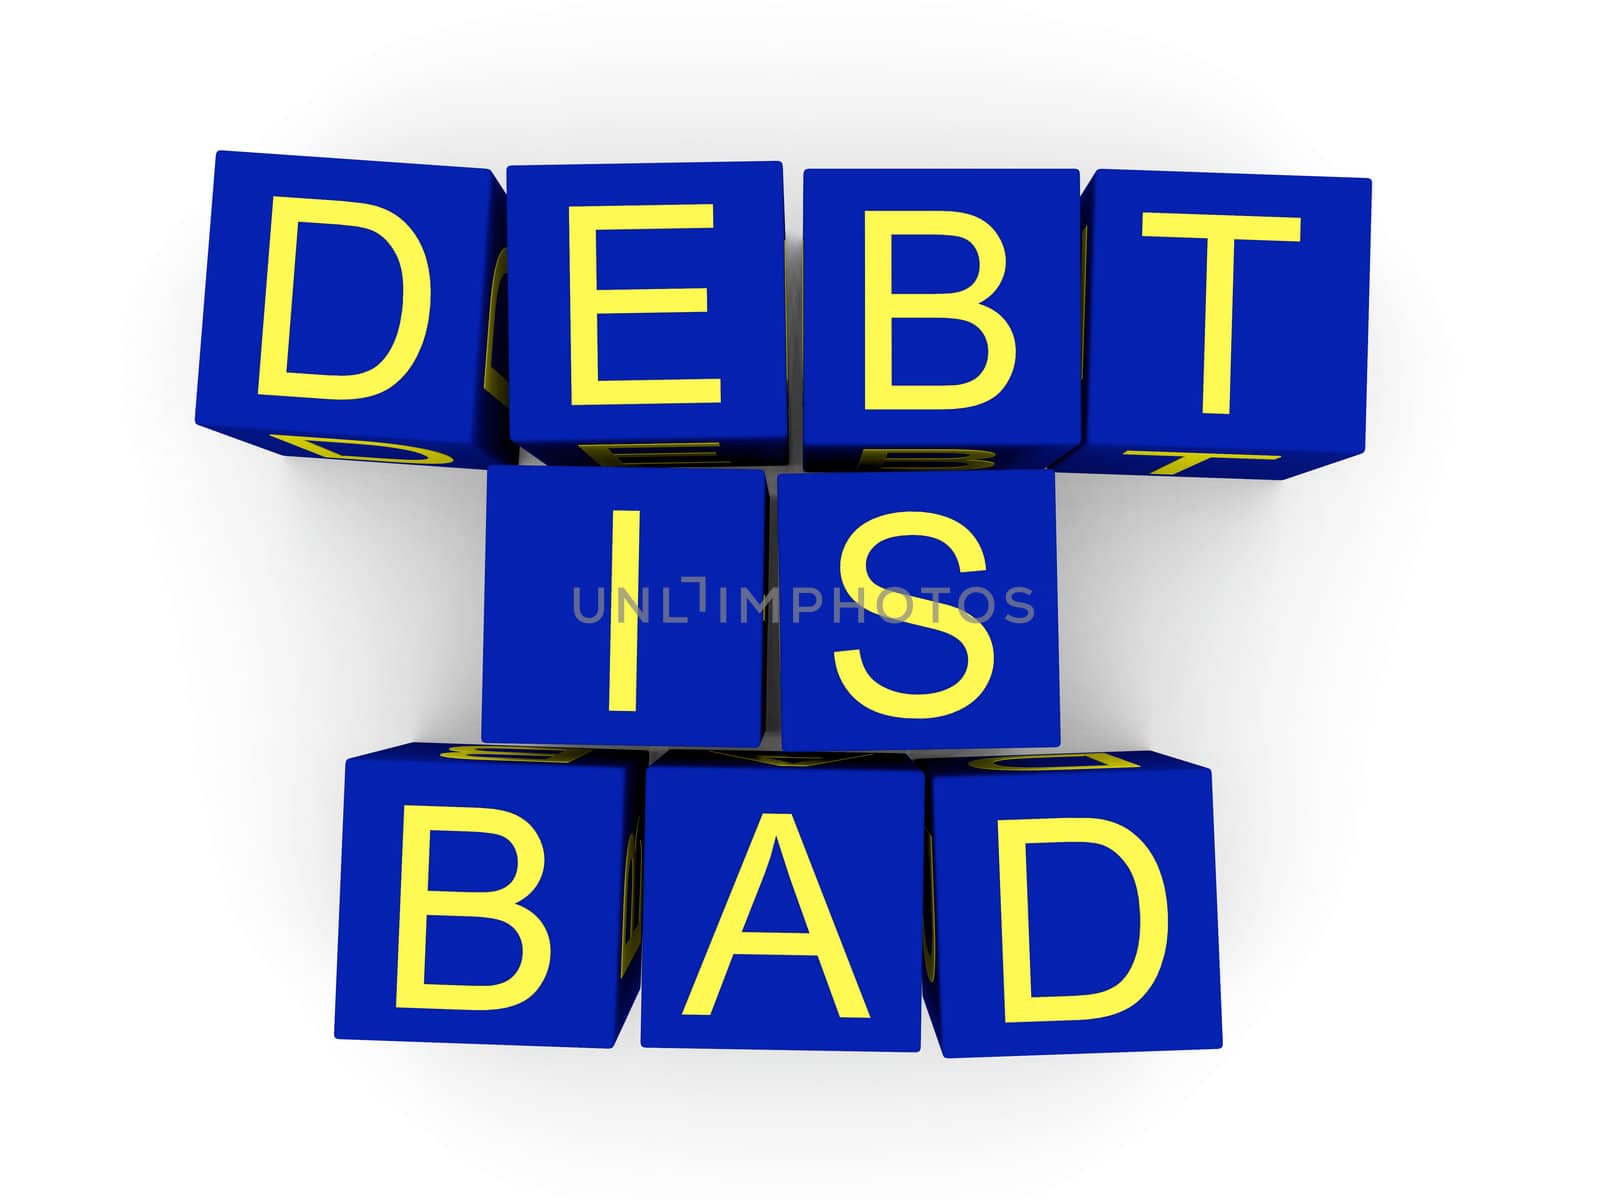 Debt is bad by Harvepino